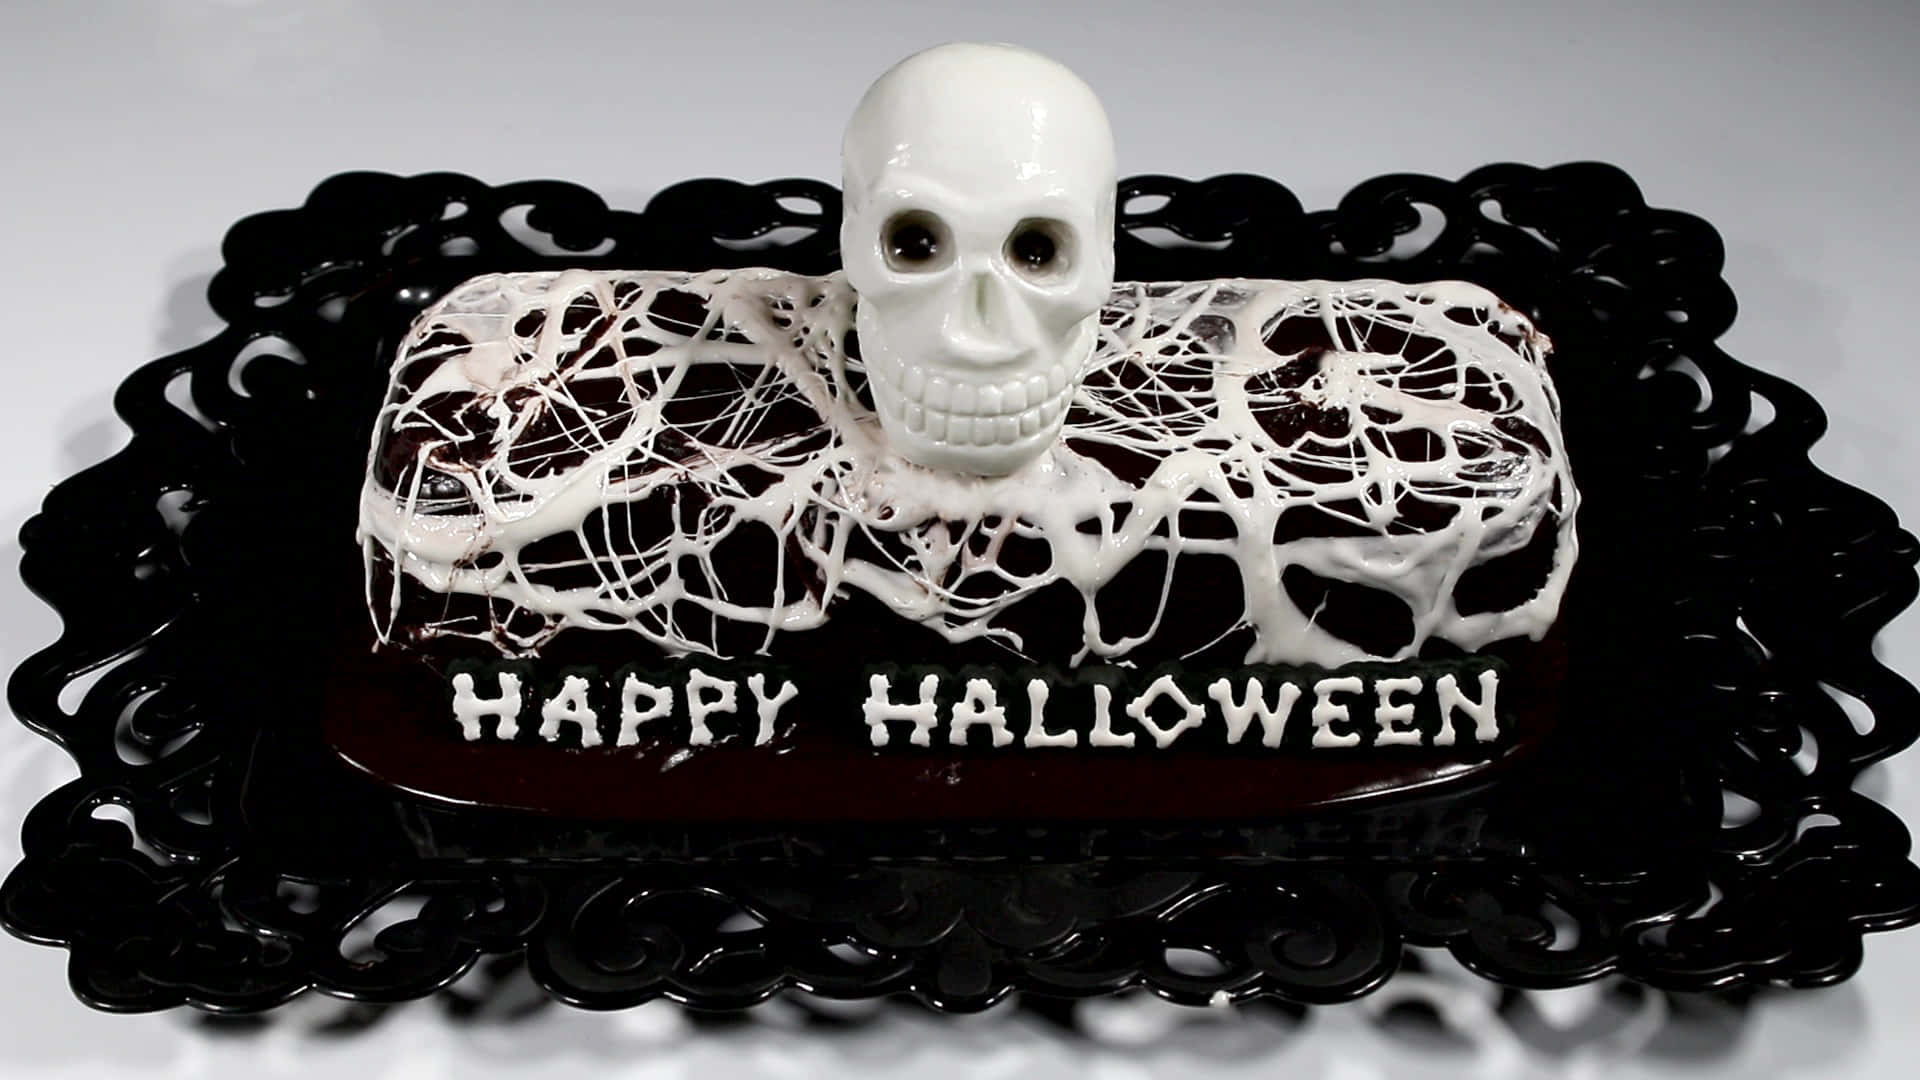 Celebrate Halloween with a Deliciously Spooky Cake! Wallpaper